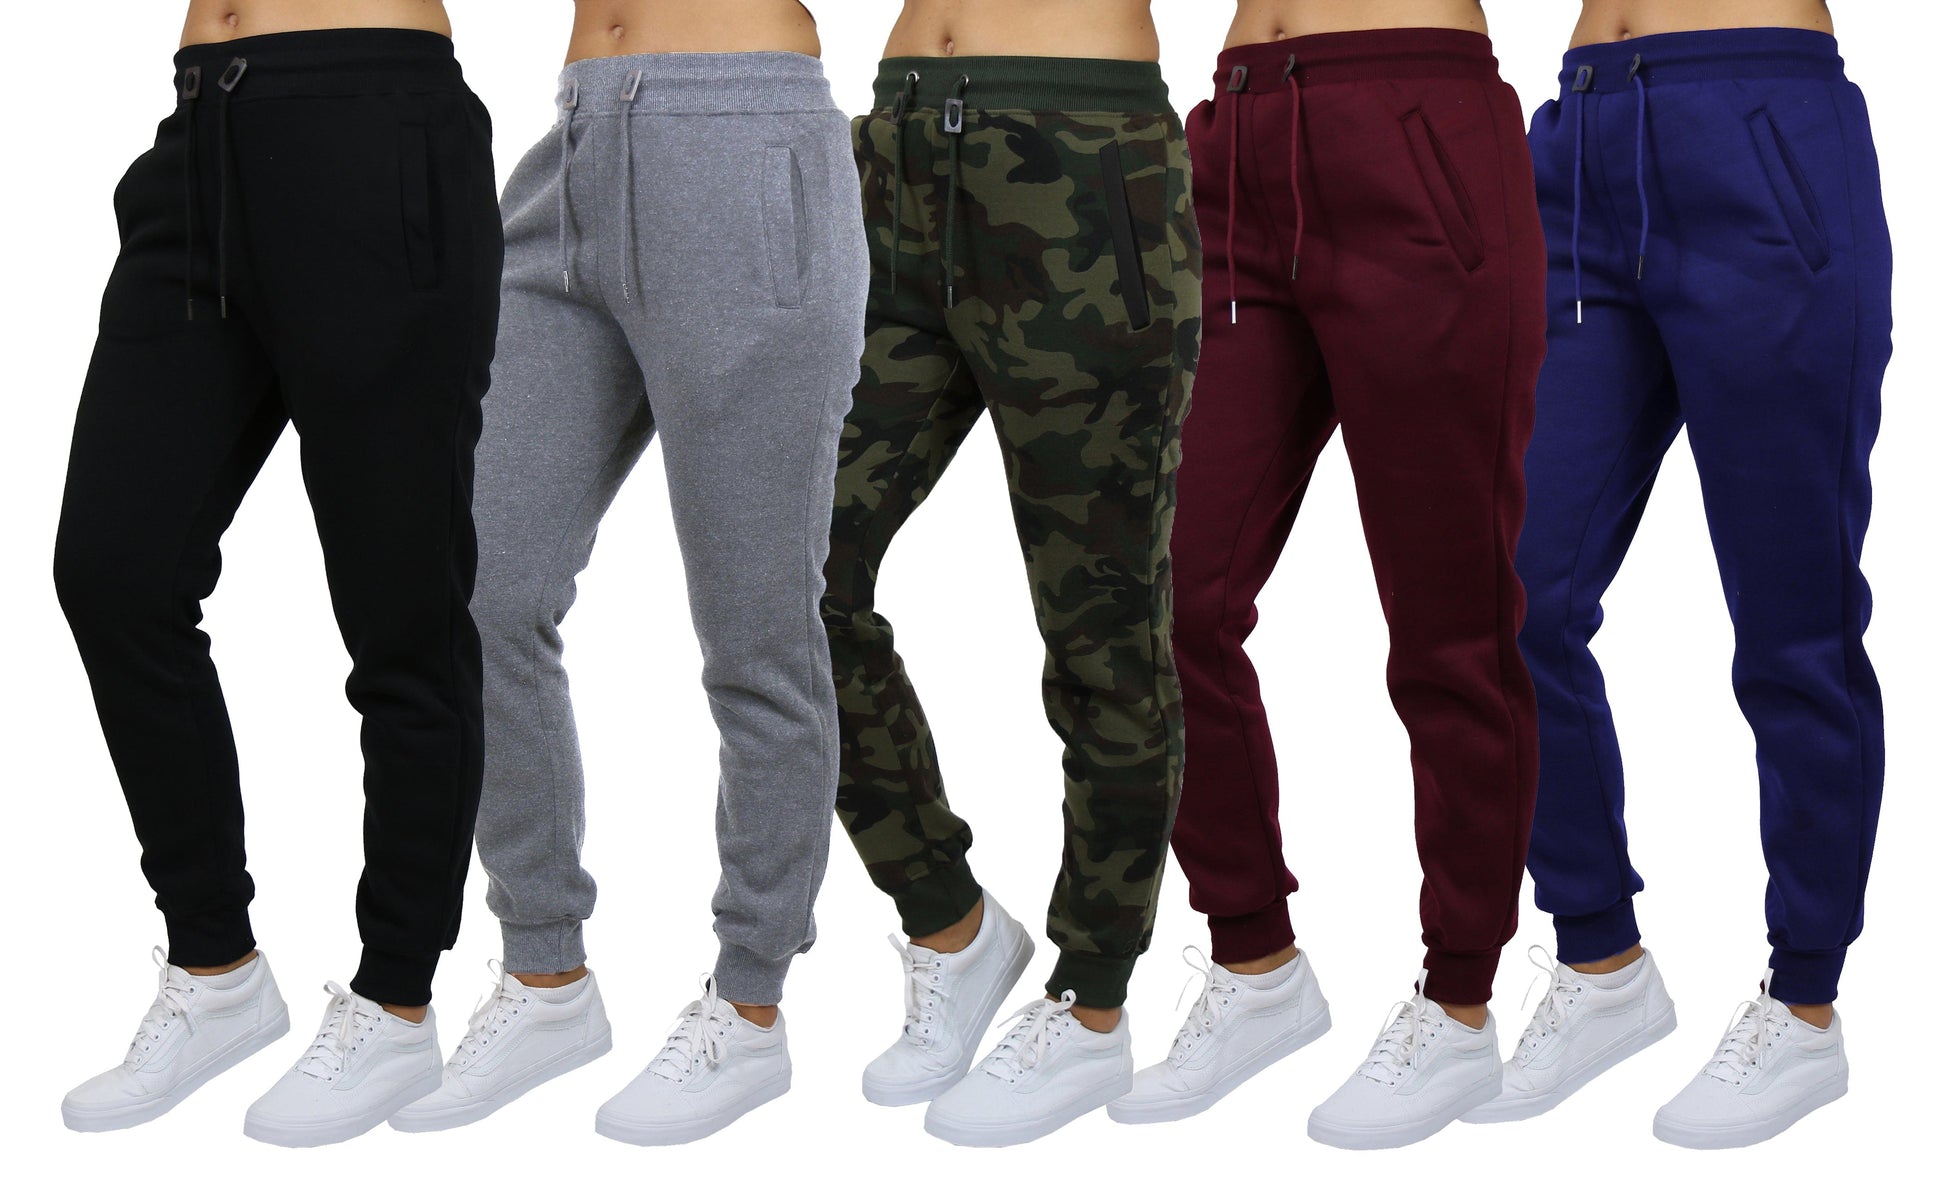 Galaxy by Harvic 3-Pack Women's Loose Fit Fleece Jogger Sweatpants (S-5XL)  